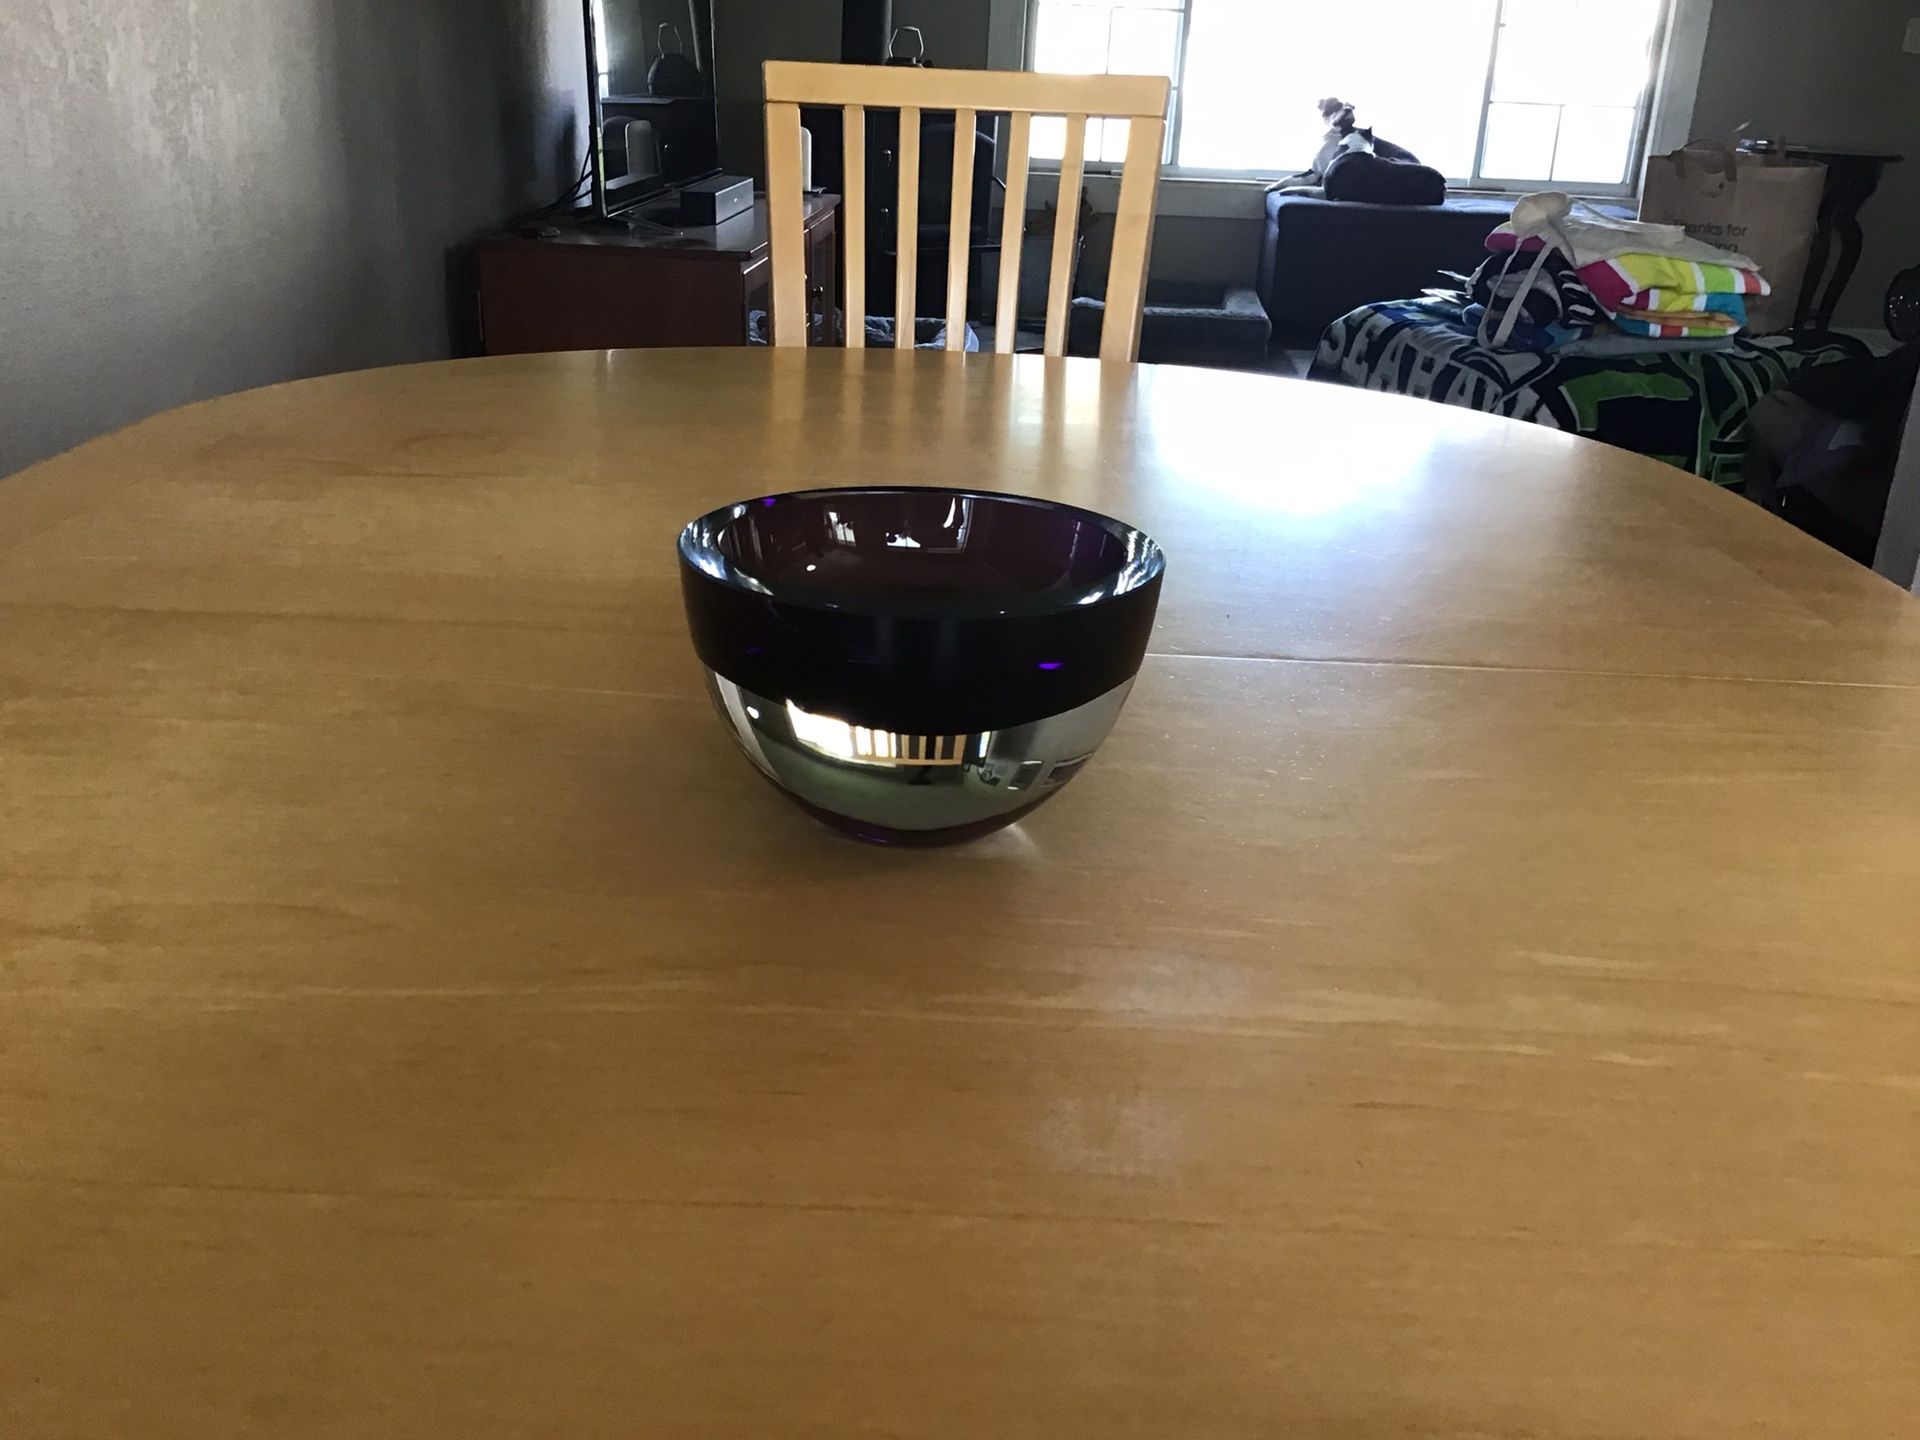 Beautiful Well Made Bowl For Decor Or Use. $5 